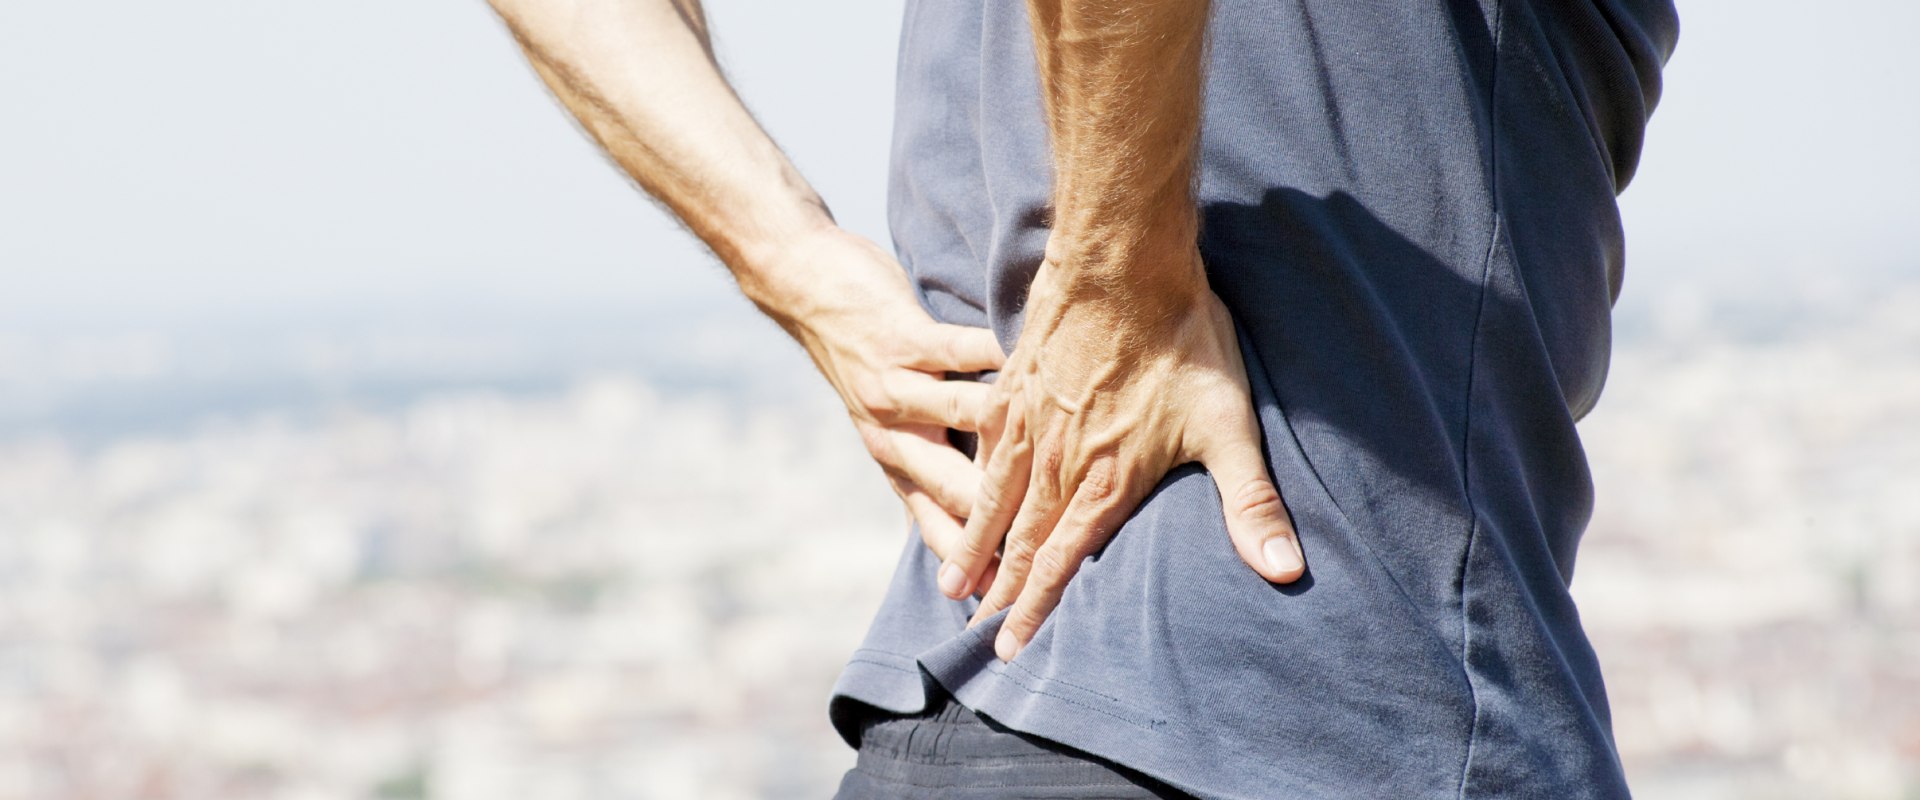 Can Physical Therapy Make Pain Worse Before It Gets Better?